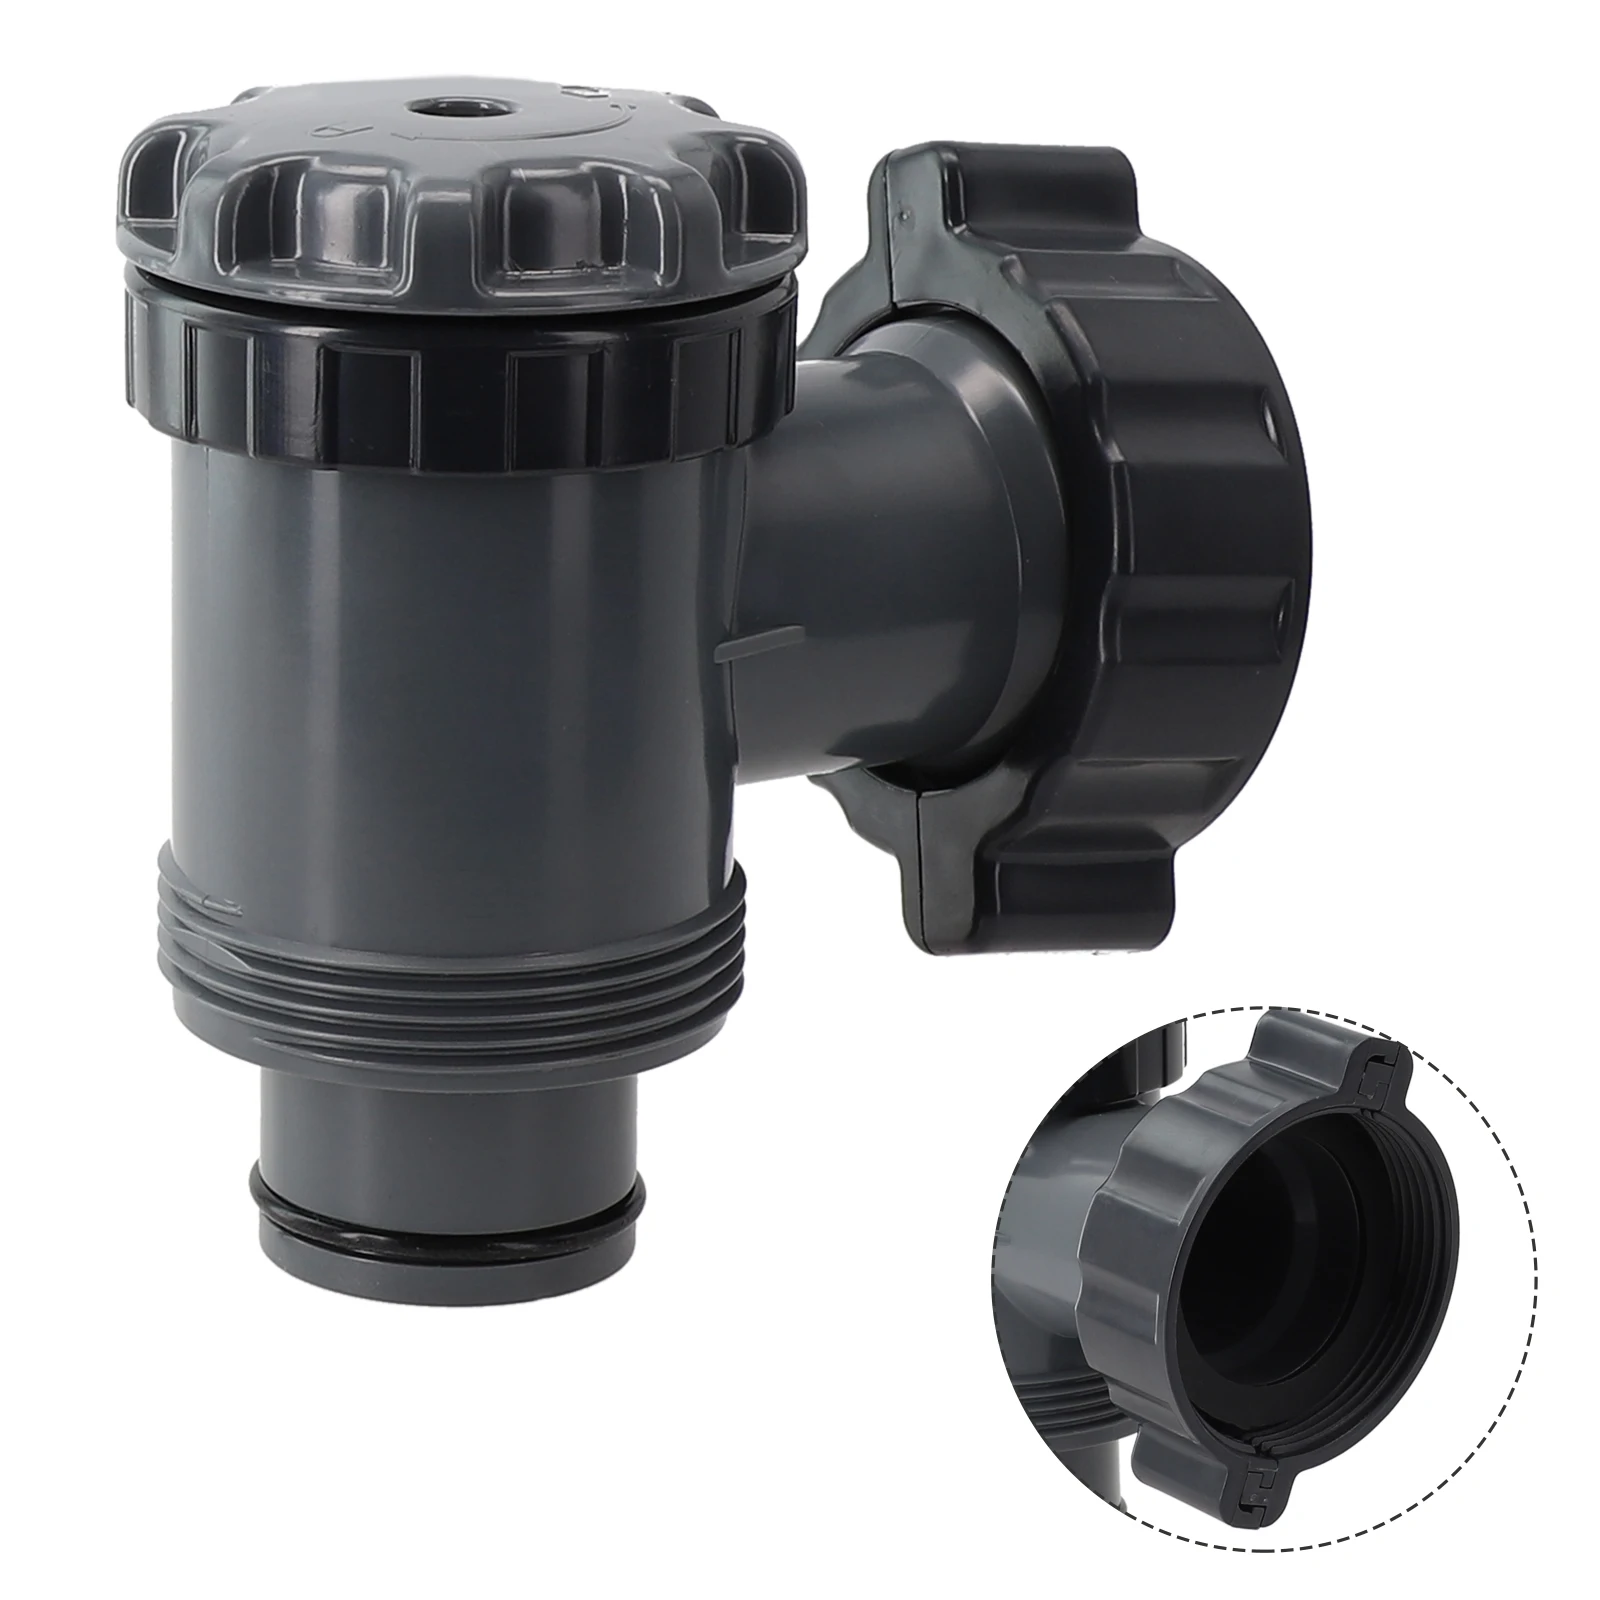 

Valve Plunger Valve Grey 2-1/2\" Threaded Connector Filter Pump For 1-1/2\" Diameter Hoses Replace On Off Durable